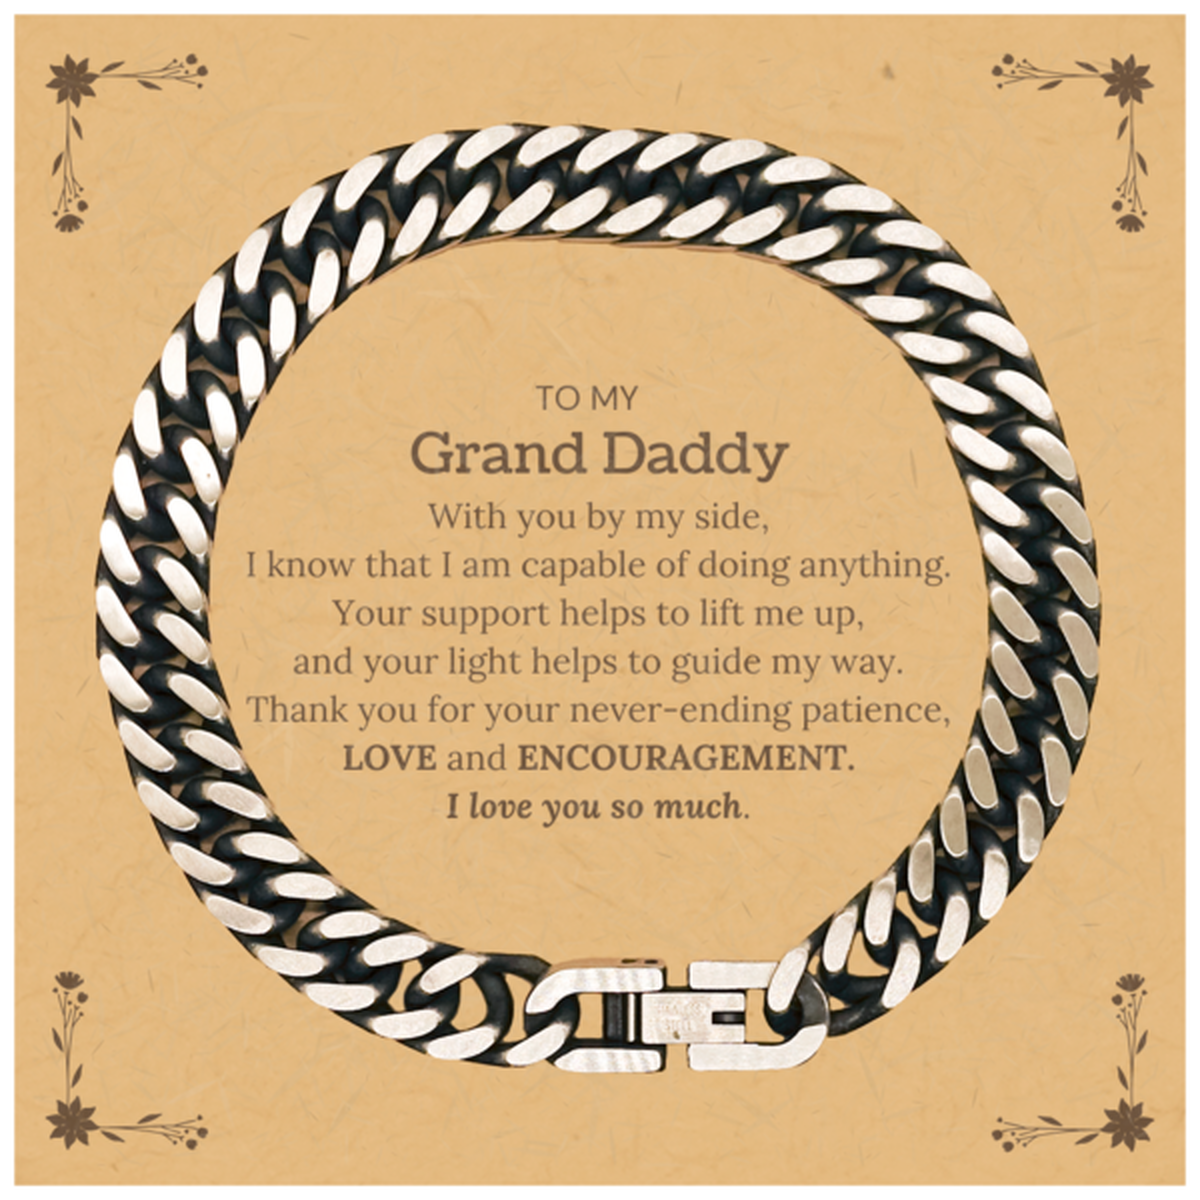 Appreciation Grand Daddy Cuban Link Chain Bracelet Gifts, To My Grand Daddy Birthday Christmas Wedding Keepsake Gifts for Grand Daddy With you by my side, I know that I am capable of doing anything. I love you so much